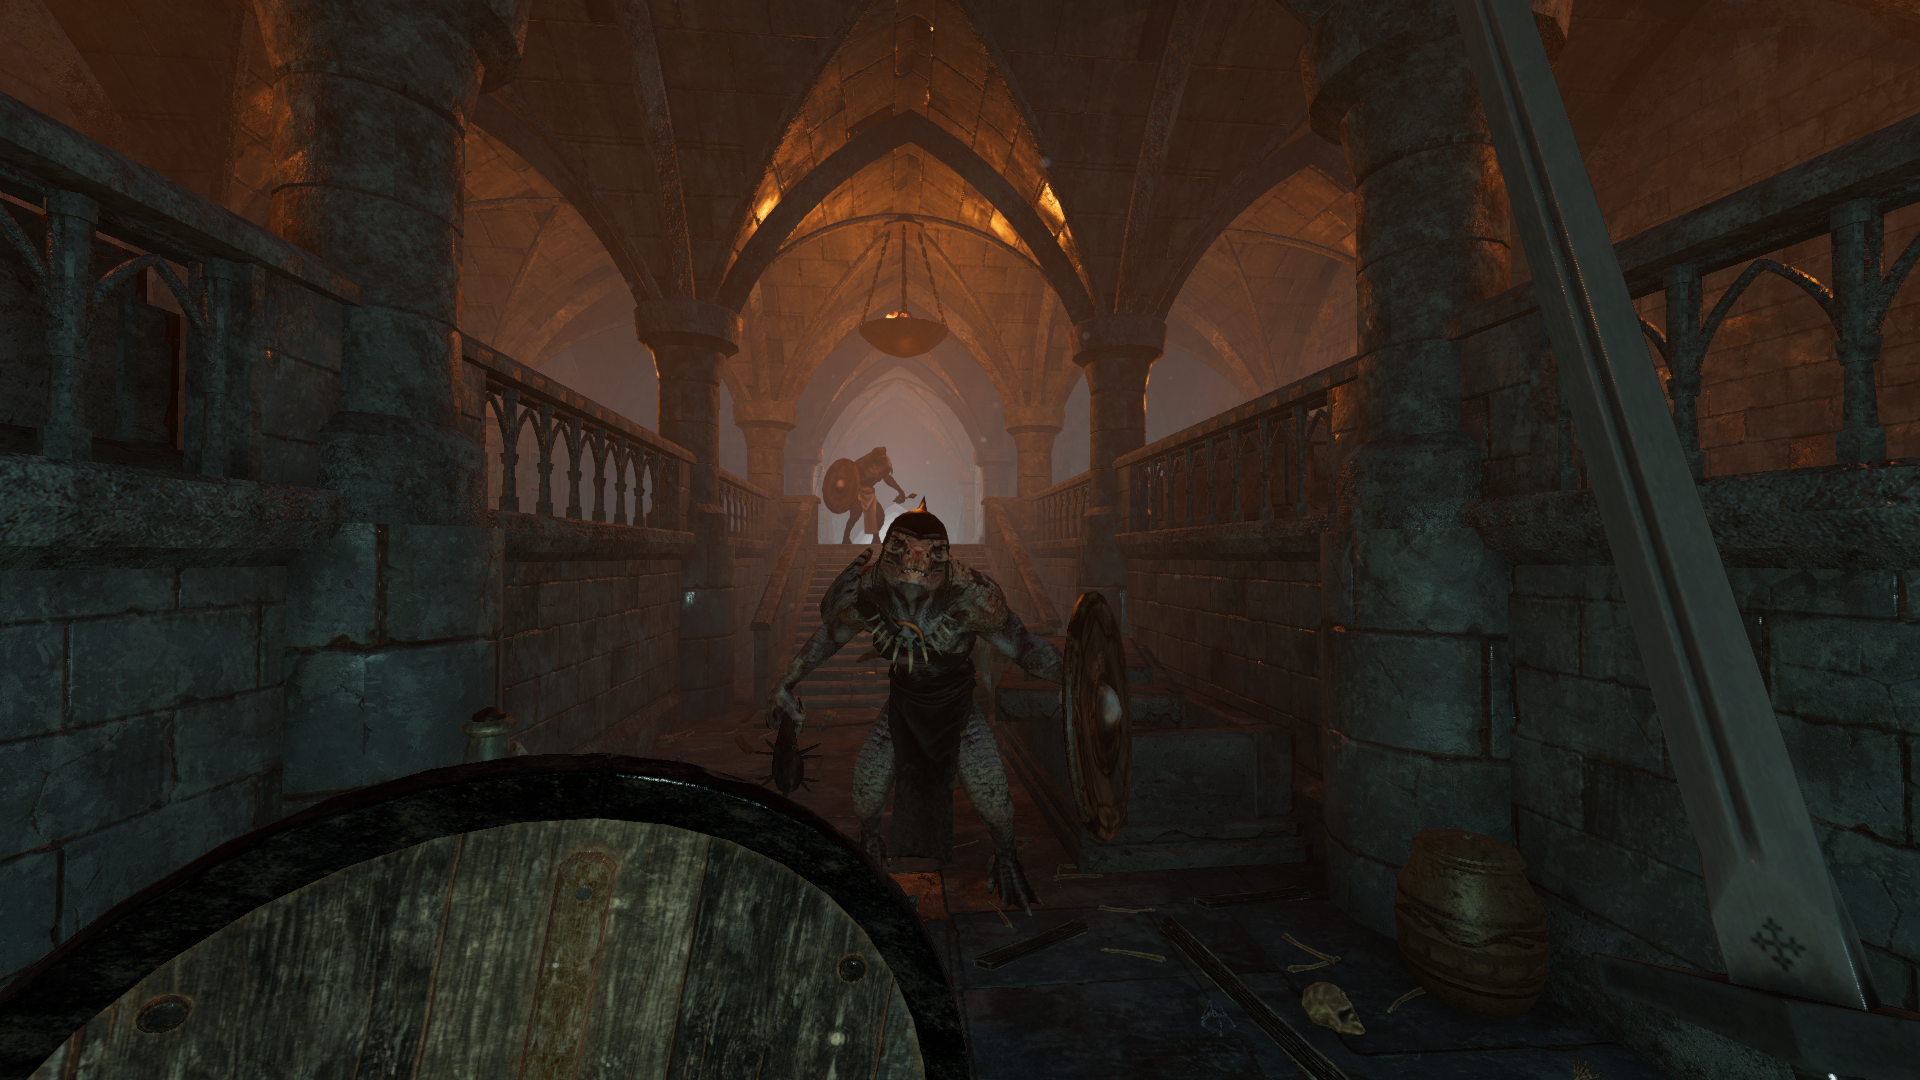 The Lord of the Rings: Return to Moria Brings Survival and Crafting to  Middle Earth – GameSpew